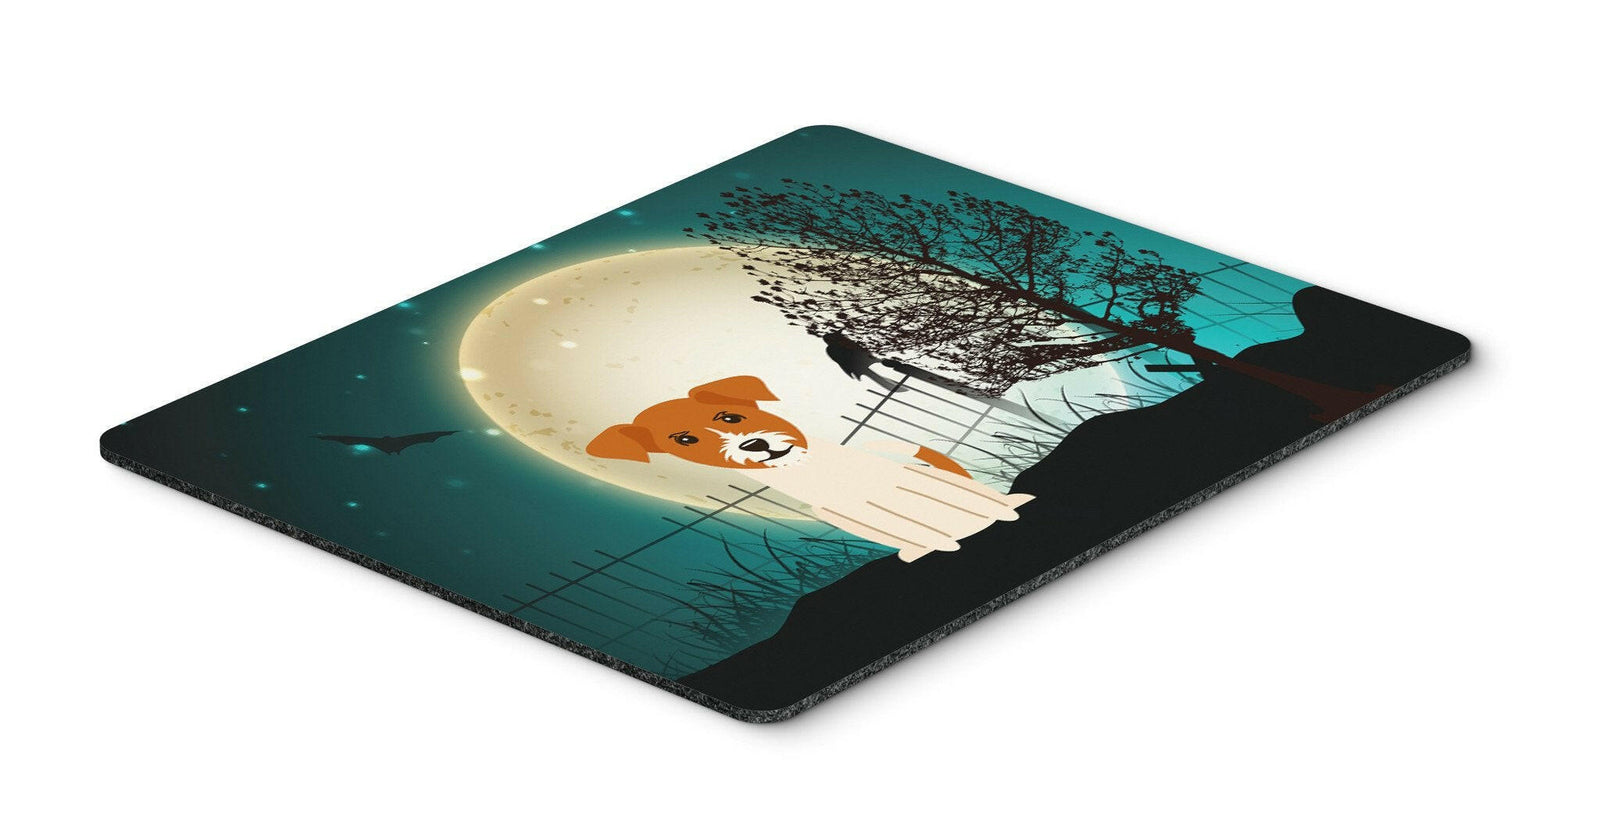 Halloween Scary Jack Russell Terrier Mouse Pad, Hot Pad or Trivet BB2298MP by Caroline's Treasures